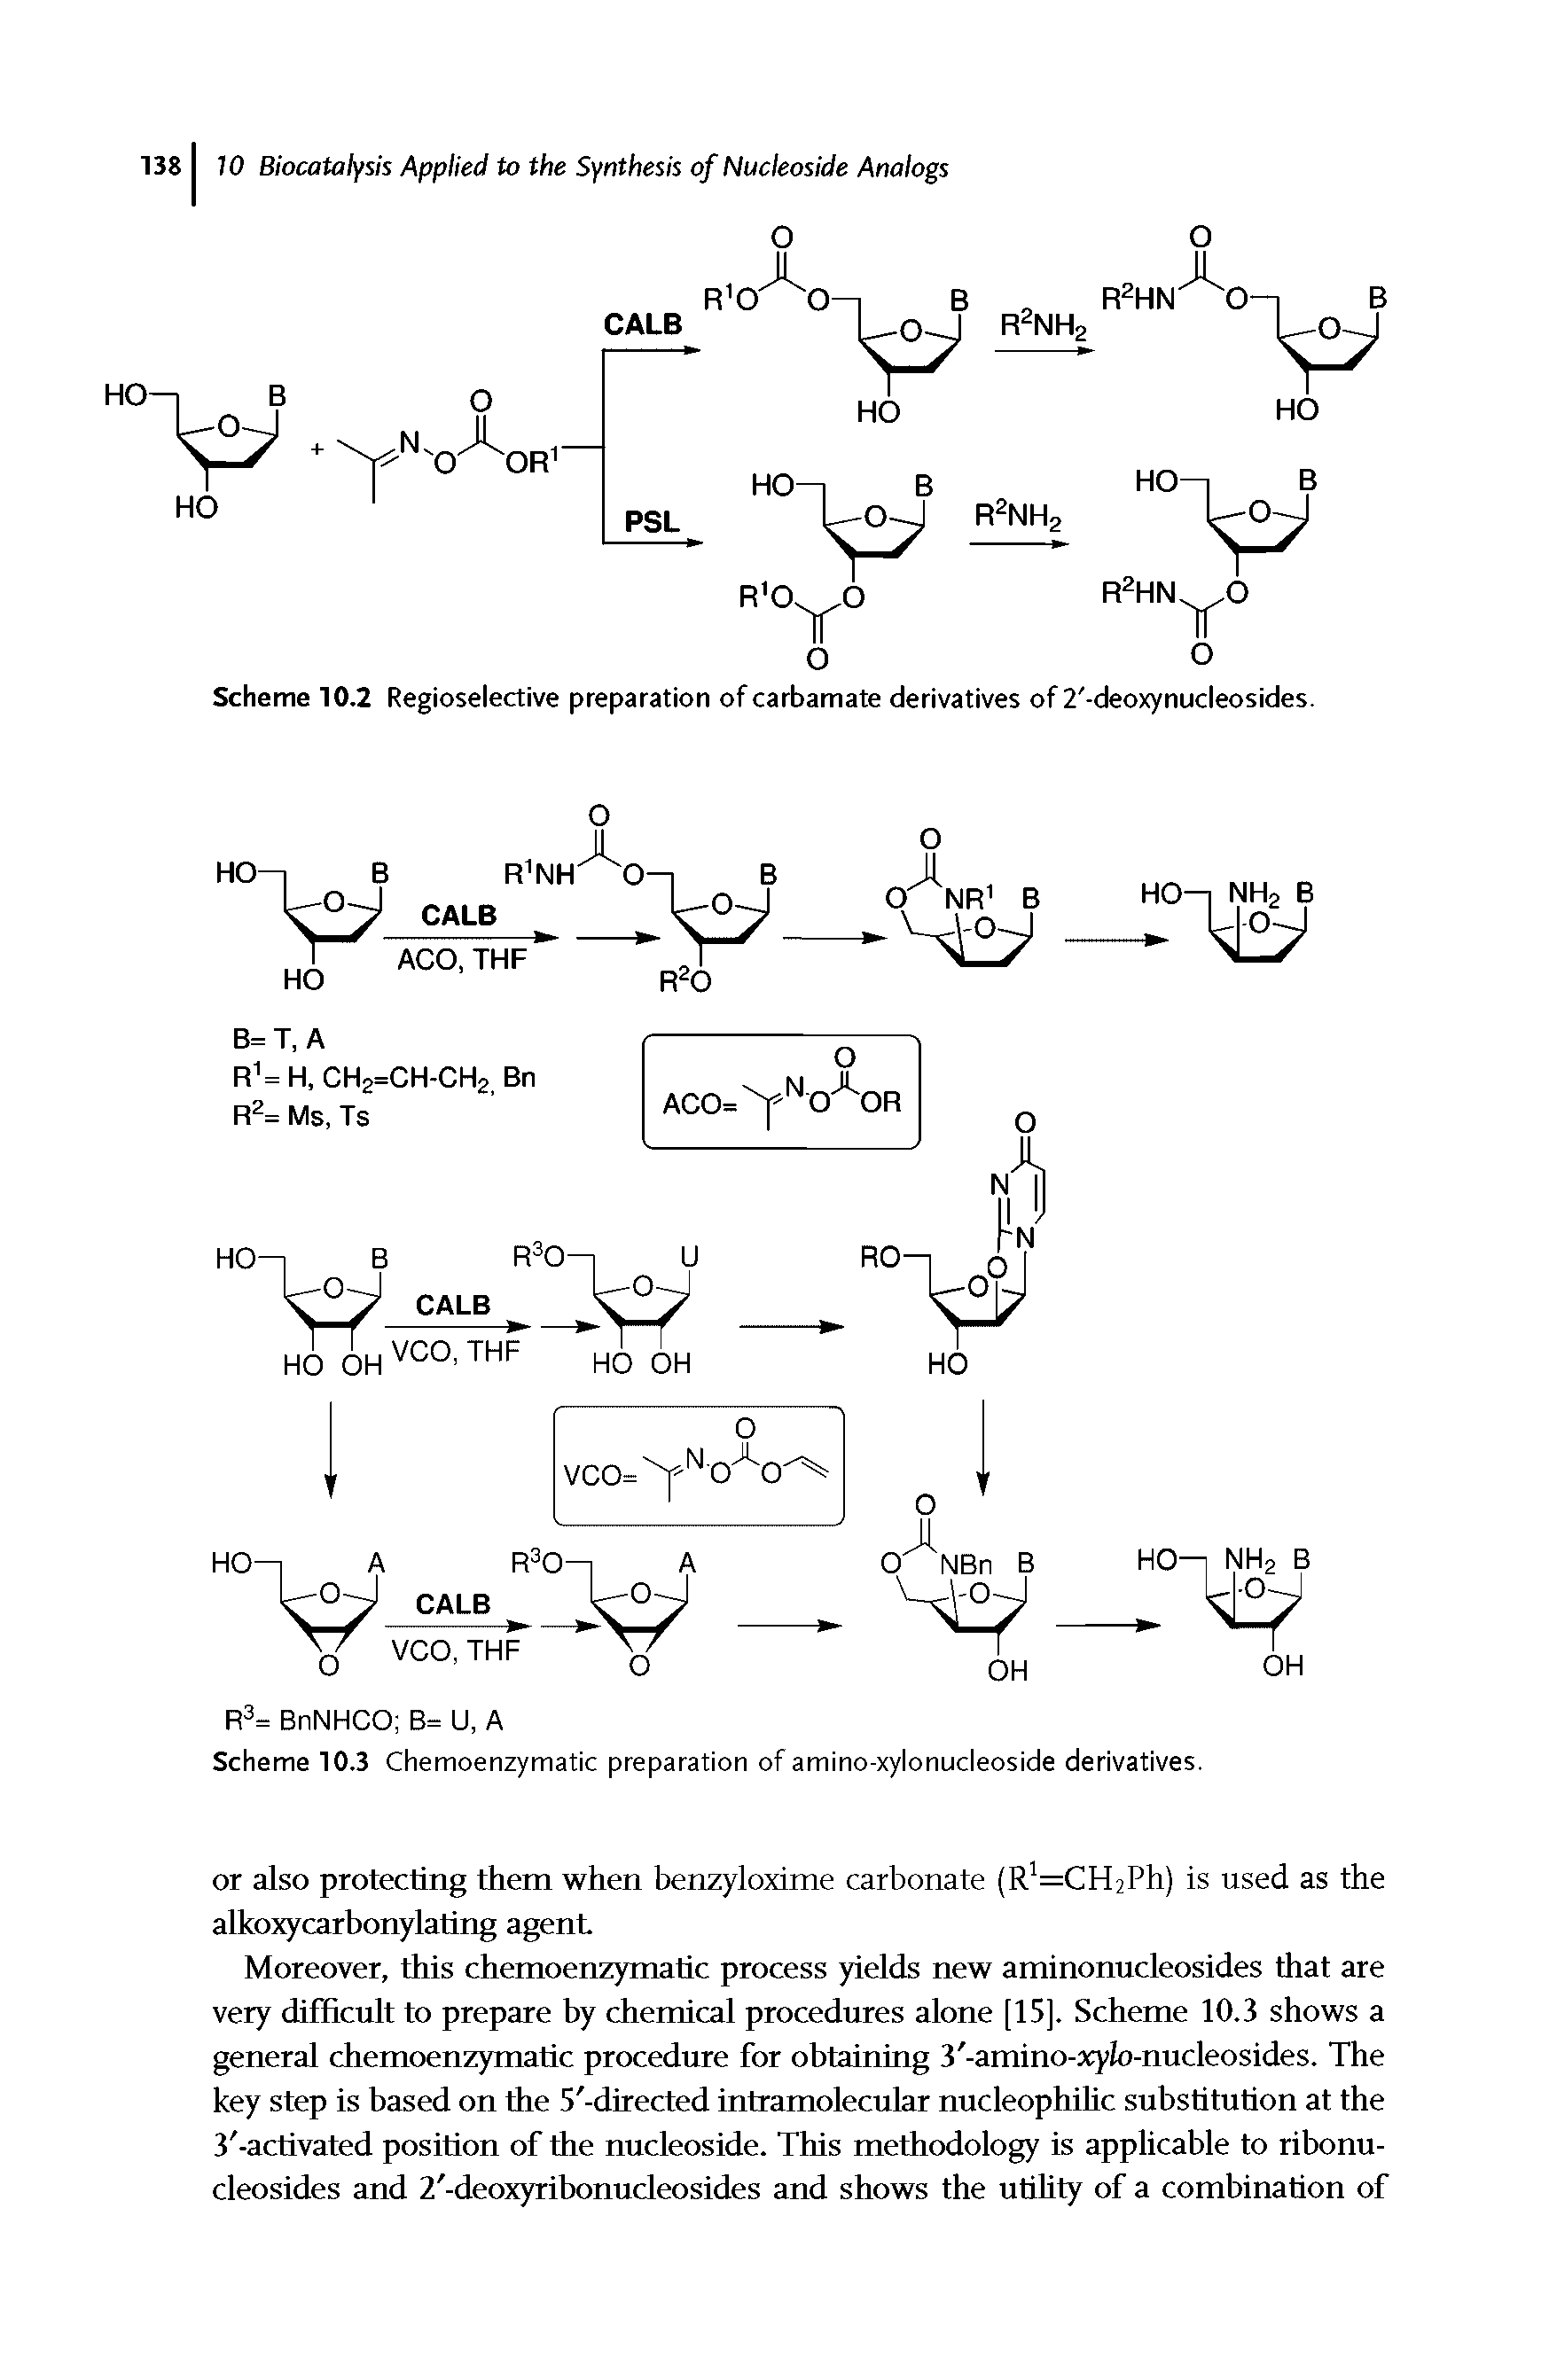 Scheme 10.2 Regioselective preparation of carbamate derivatives of 2 -deoxynucleosides.